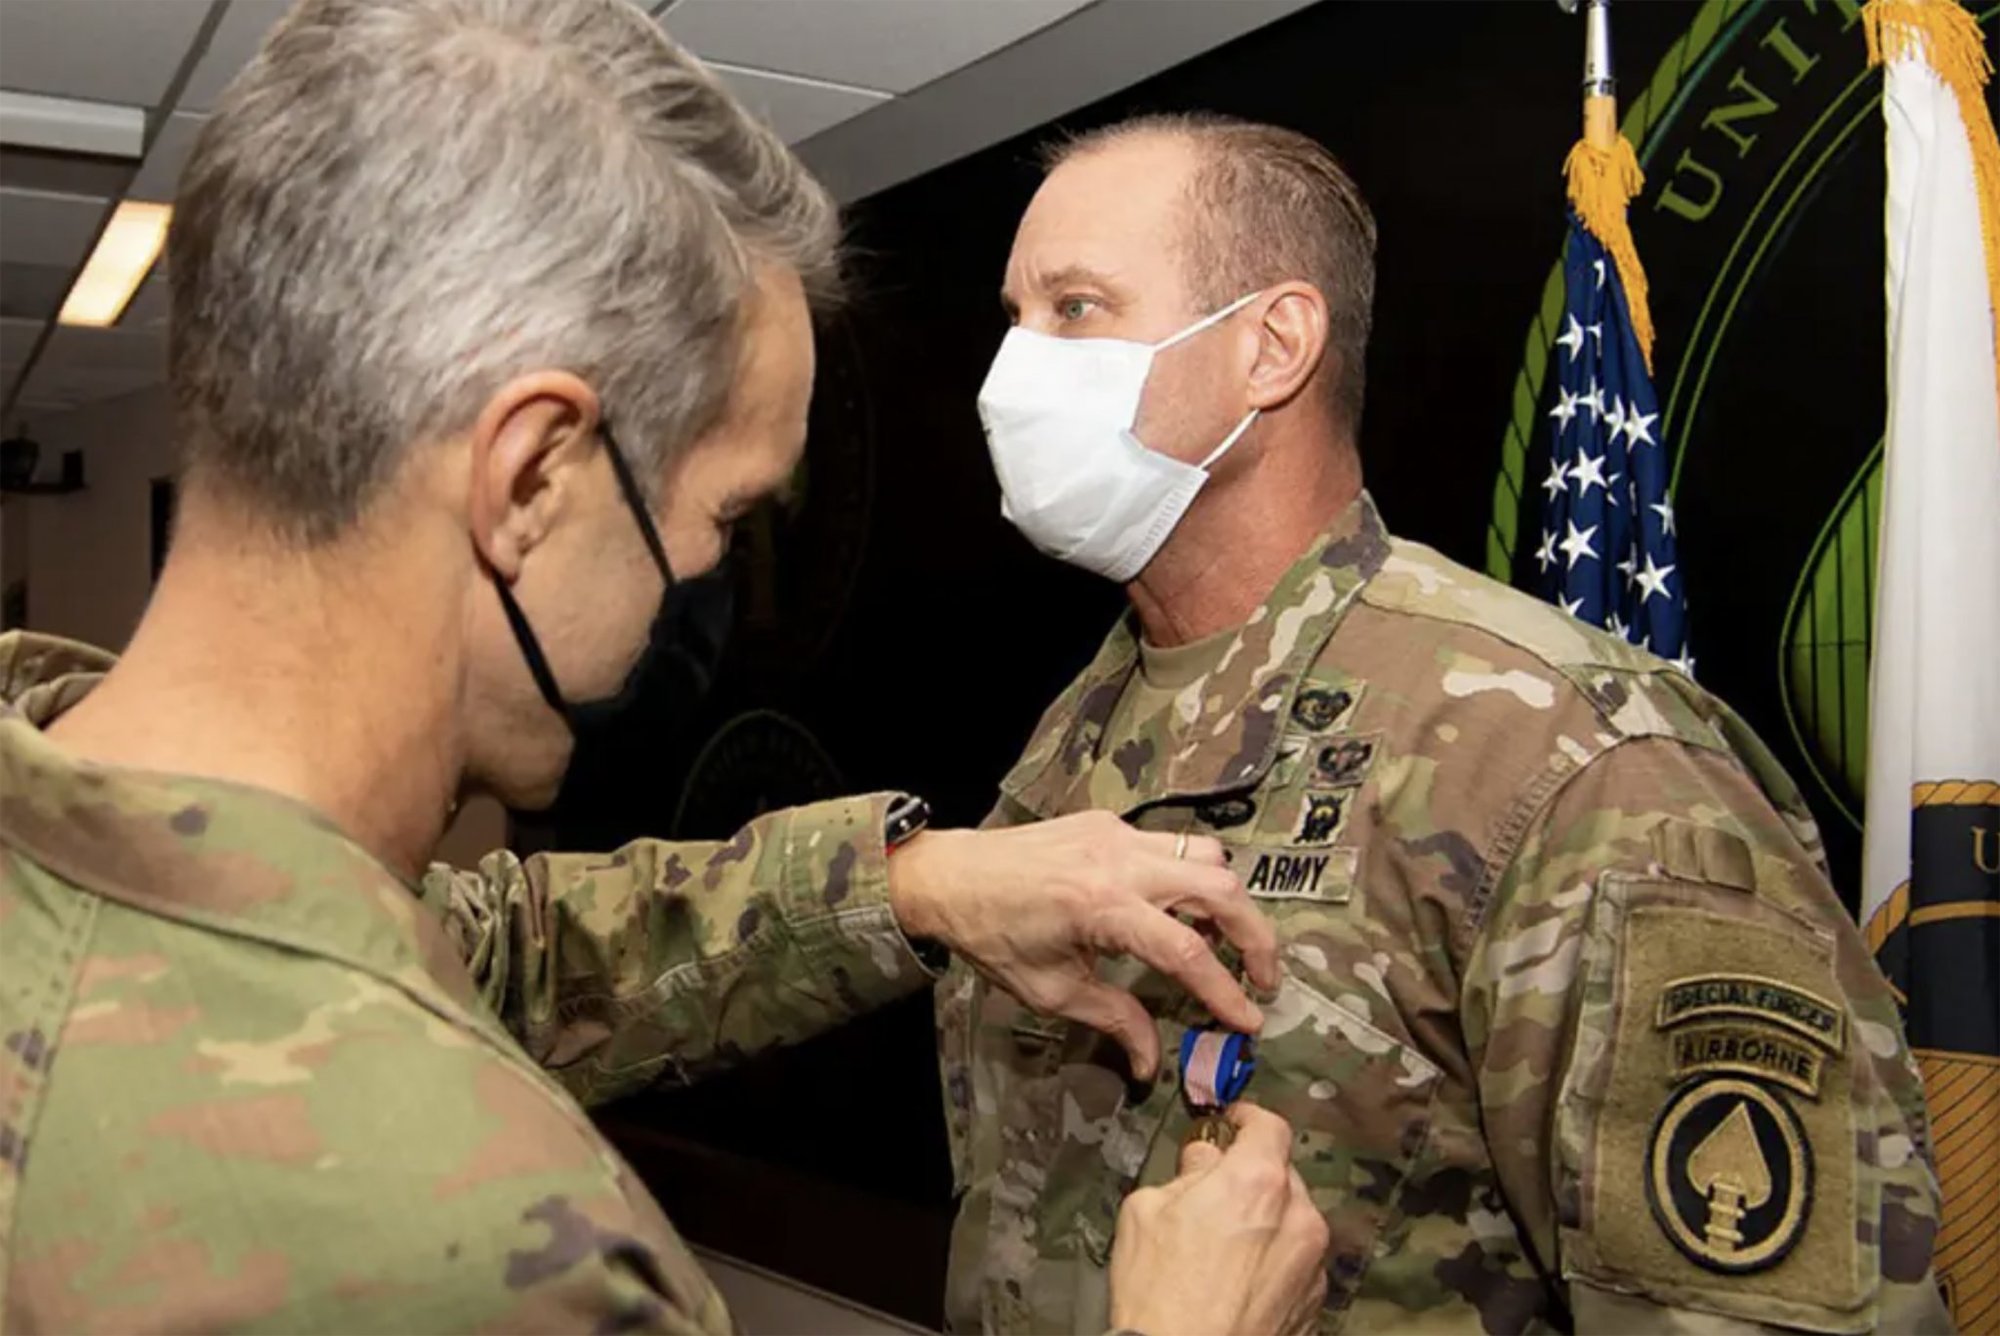 Gen Richard D. Clarke, commander, U.S. Special Operations Command, presents Lt. Col. Larry Wyatt, USSOCOM clinic director, with a Soldier’s Medal at MacDill Air Force Base, Fla., Dec. 22, 2020. Air Force Photo by Master Sergeant Barry Lou.